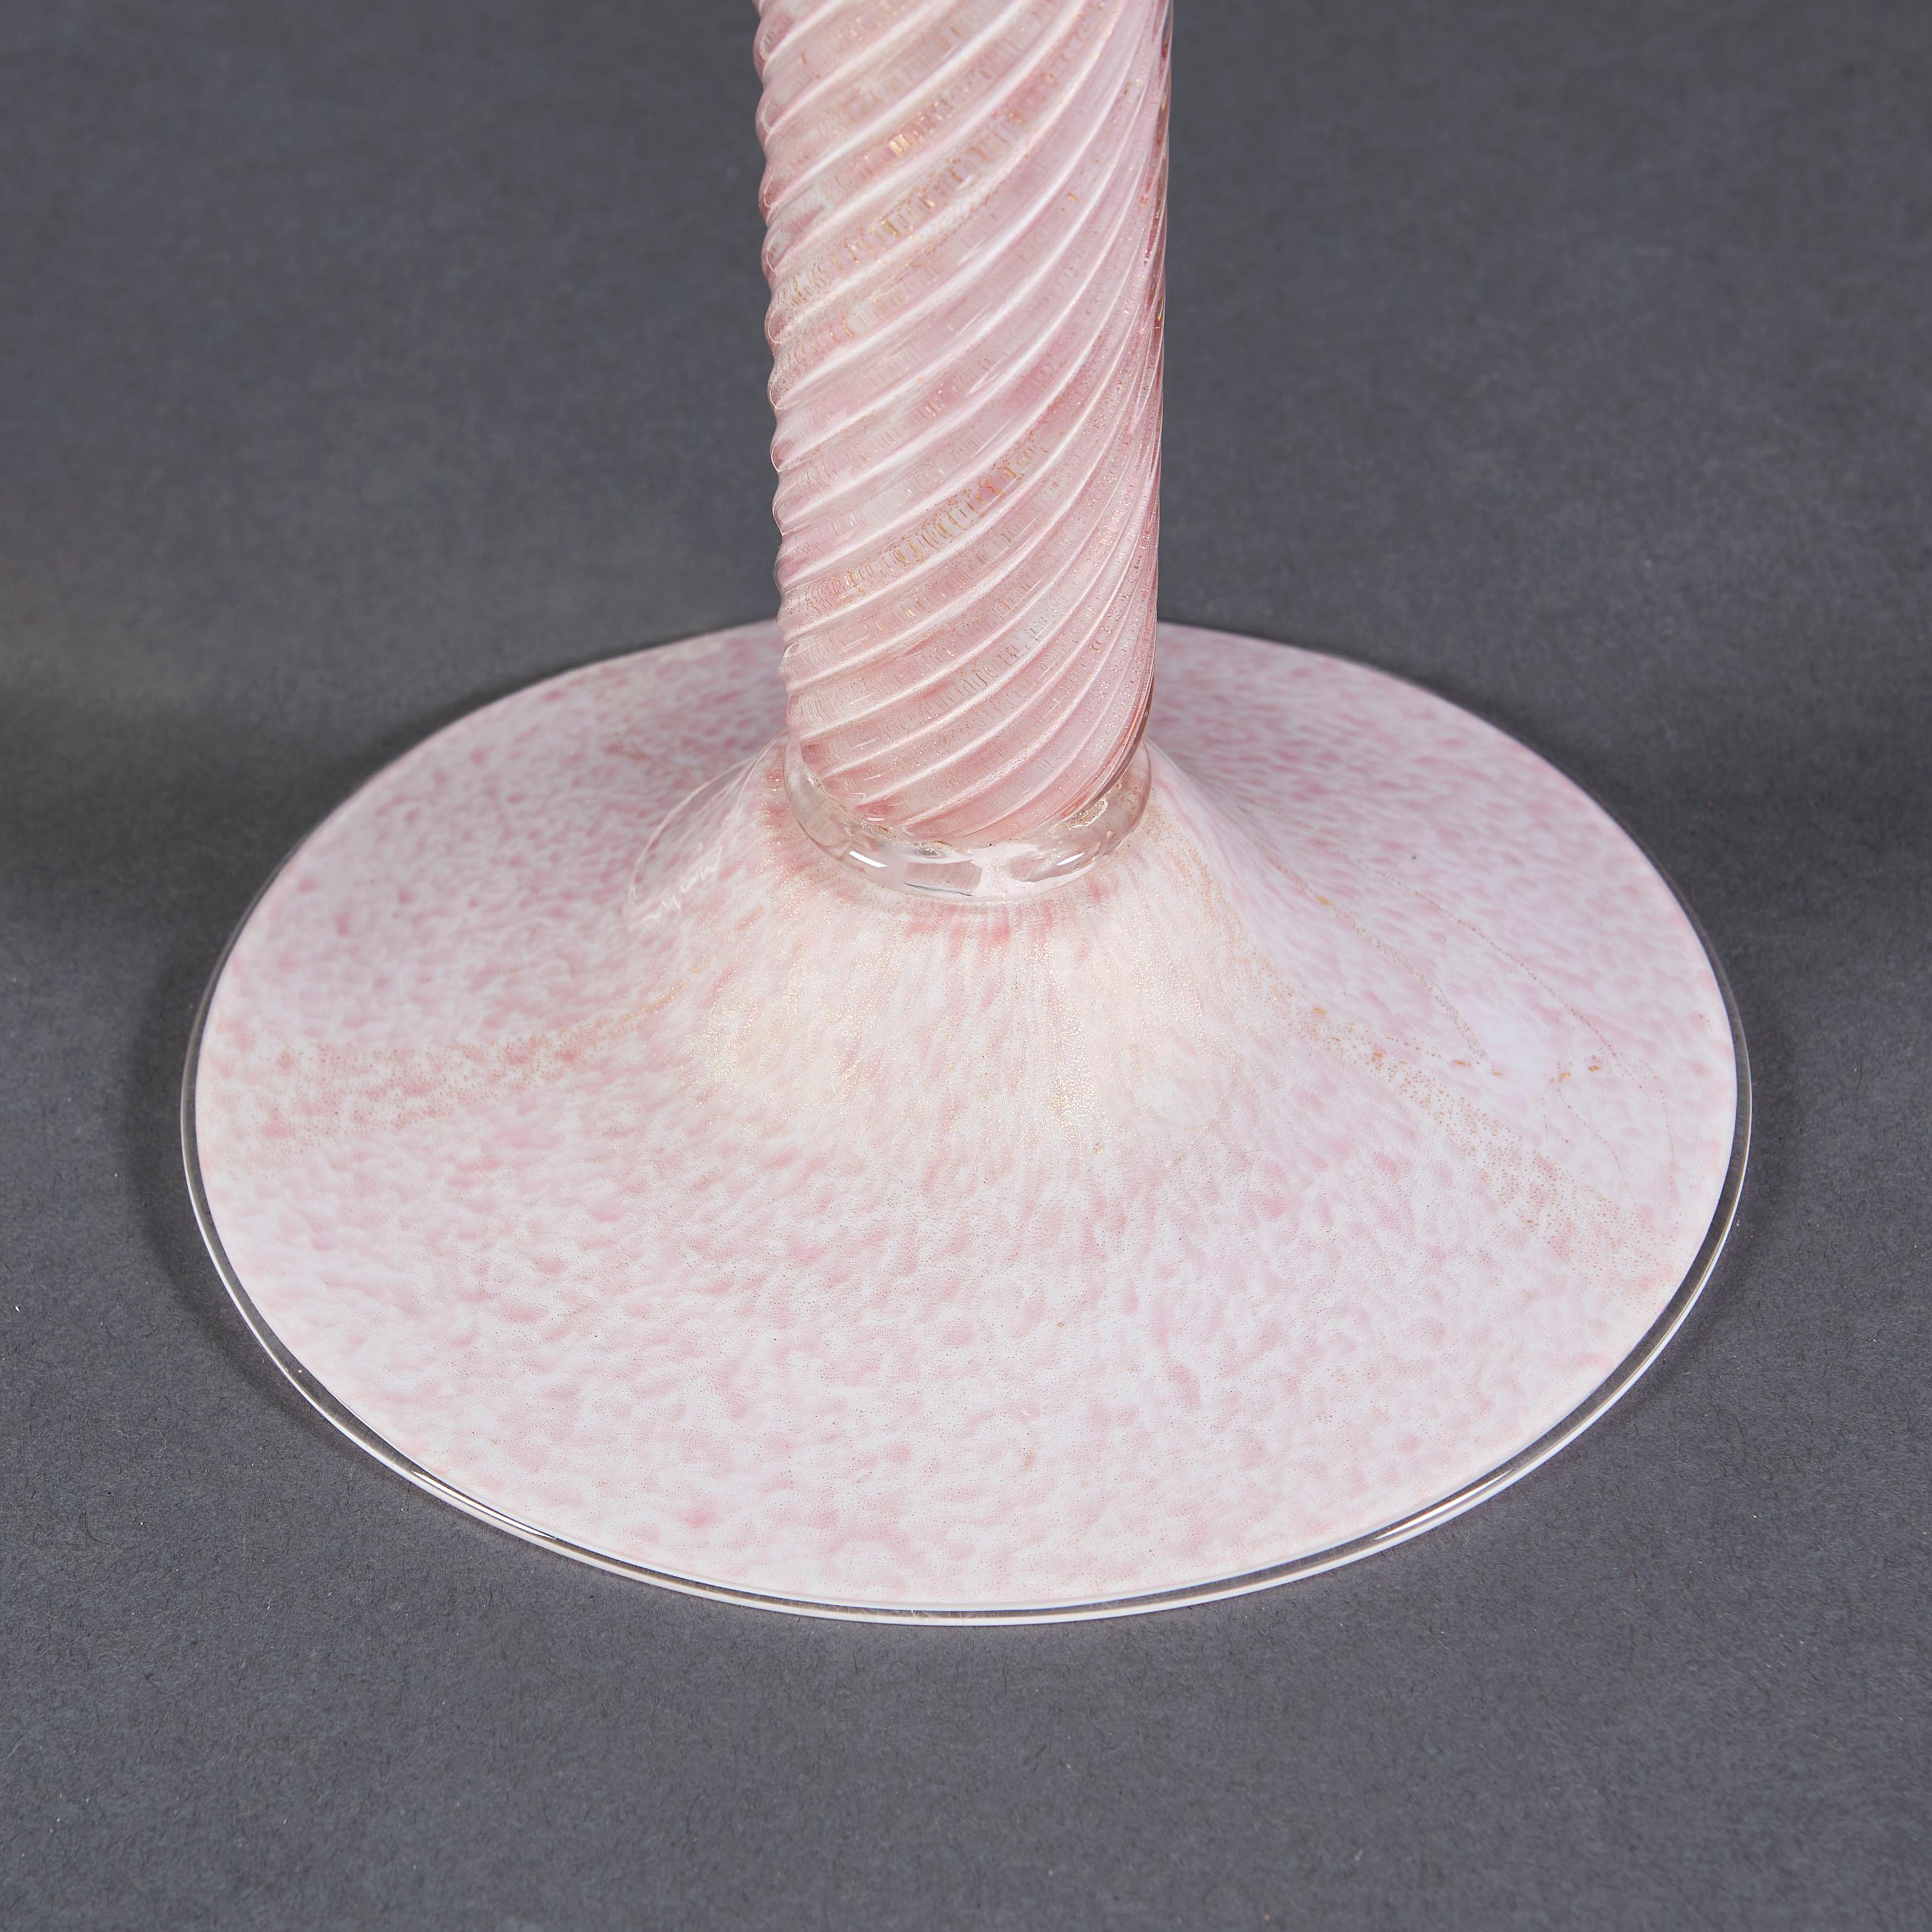 A Murano glass column lamp, composed of pale pink glass, the stem twisted in a spiral form, supported on a disc shaped base of mottled pink glass.

Please note, lampshade not included.

Currently wired for the UK.